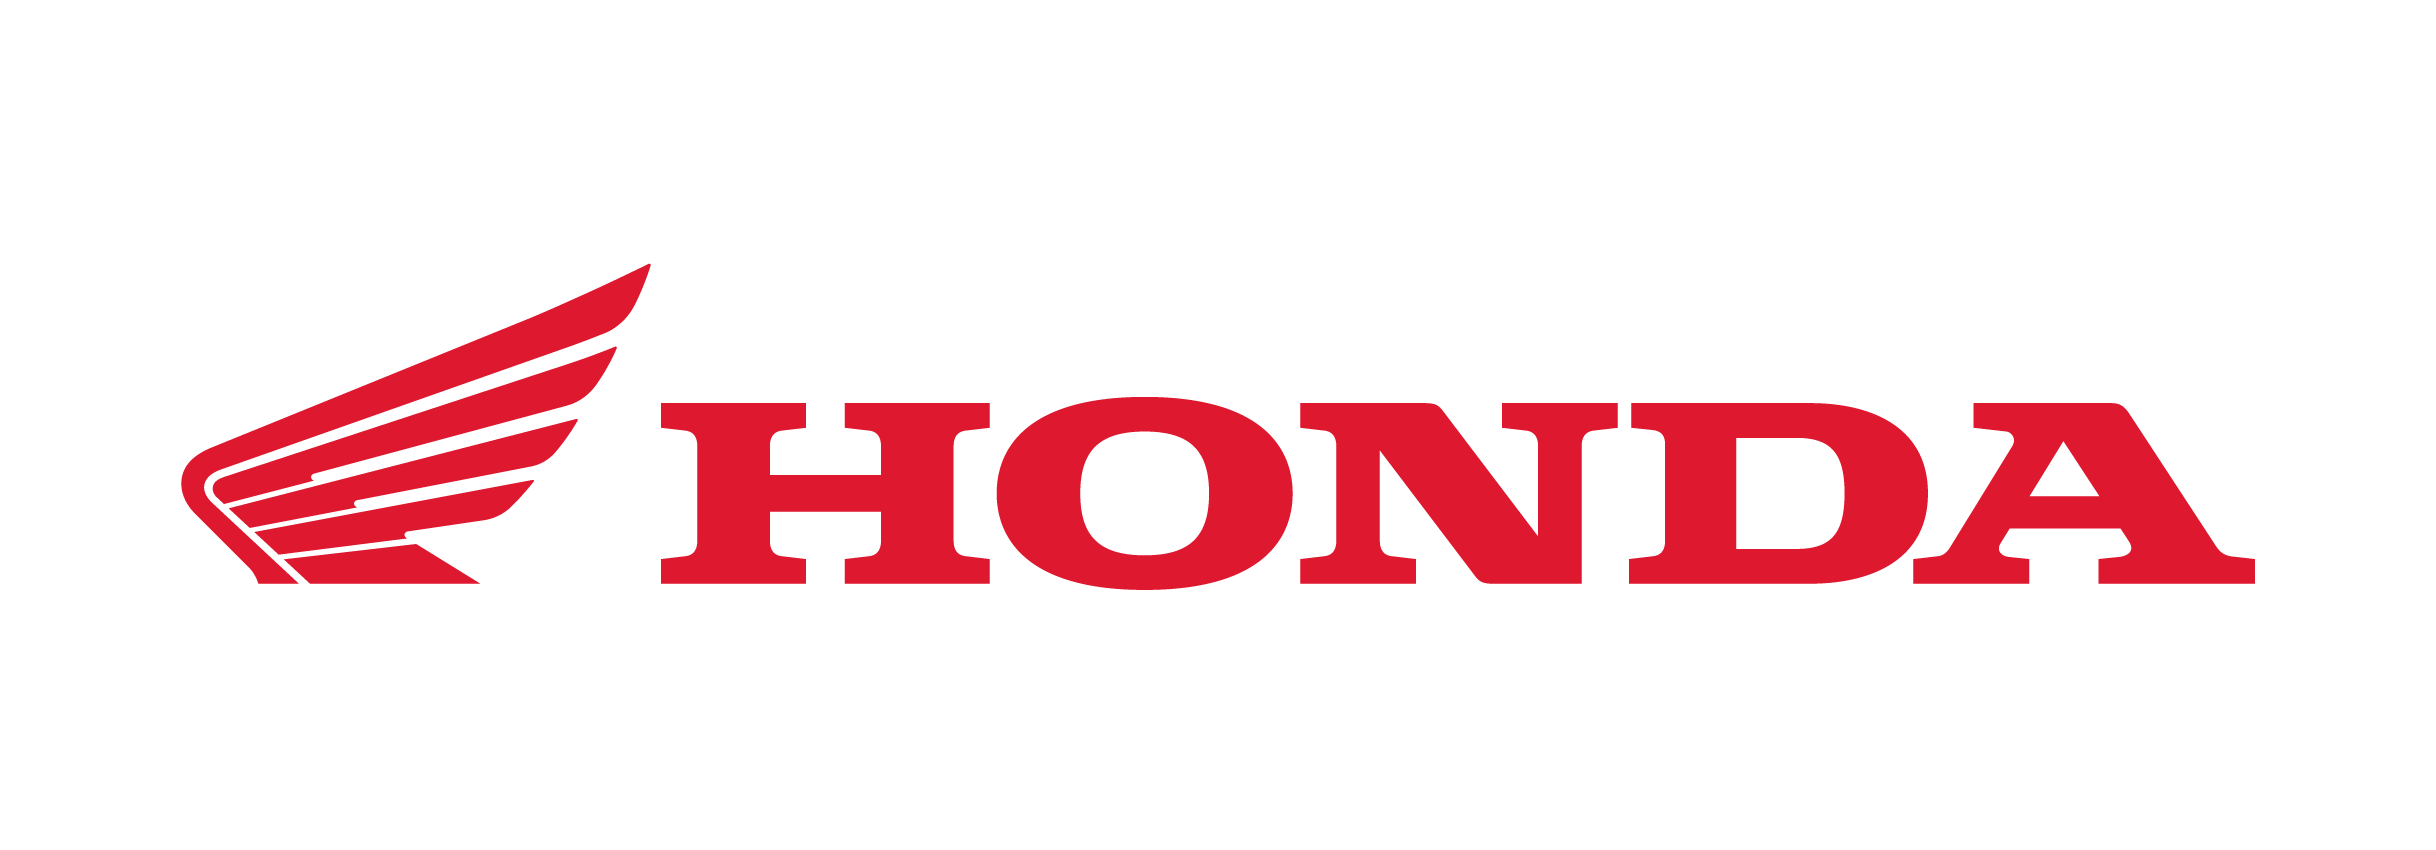 Lots of announcements from Honda